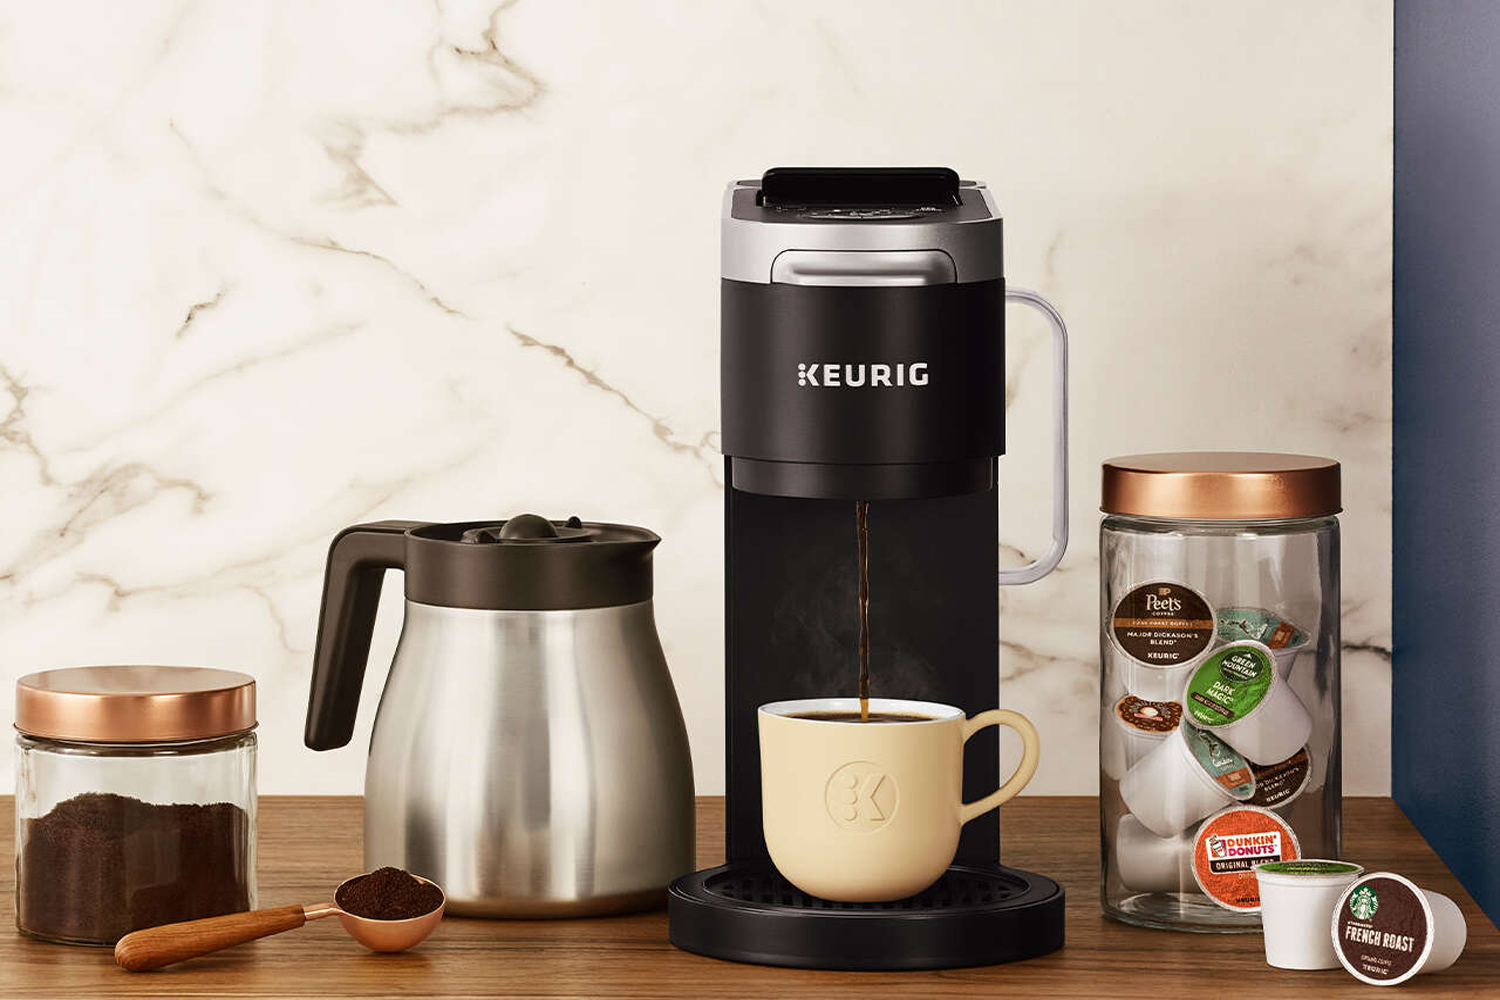 https://www.themanual.com/wp-content/uploads/sites/9/2021/03/tips-on-keeping-your-keurig-coffee-pot-clean.jpg?fit=800%2C800&p=1